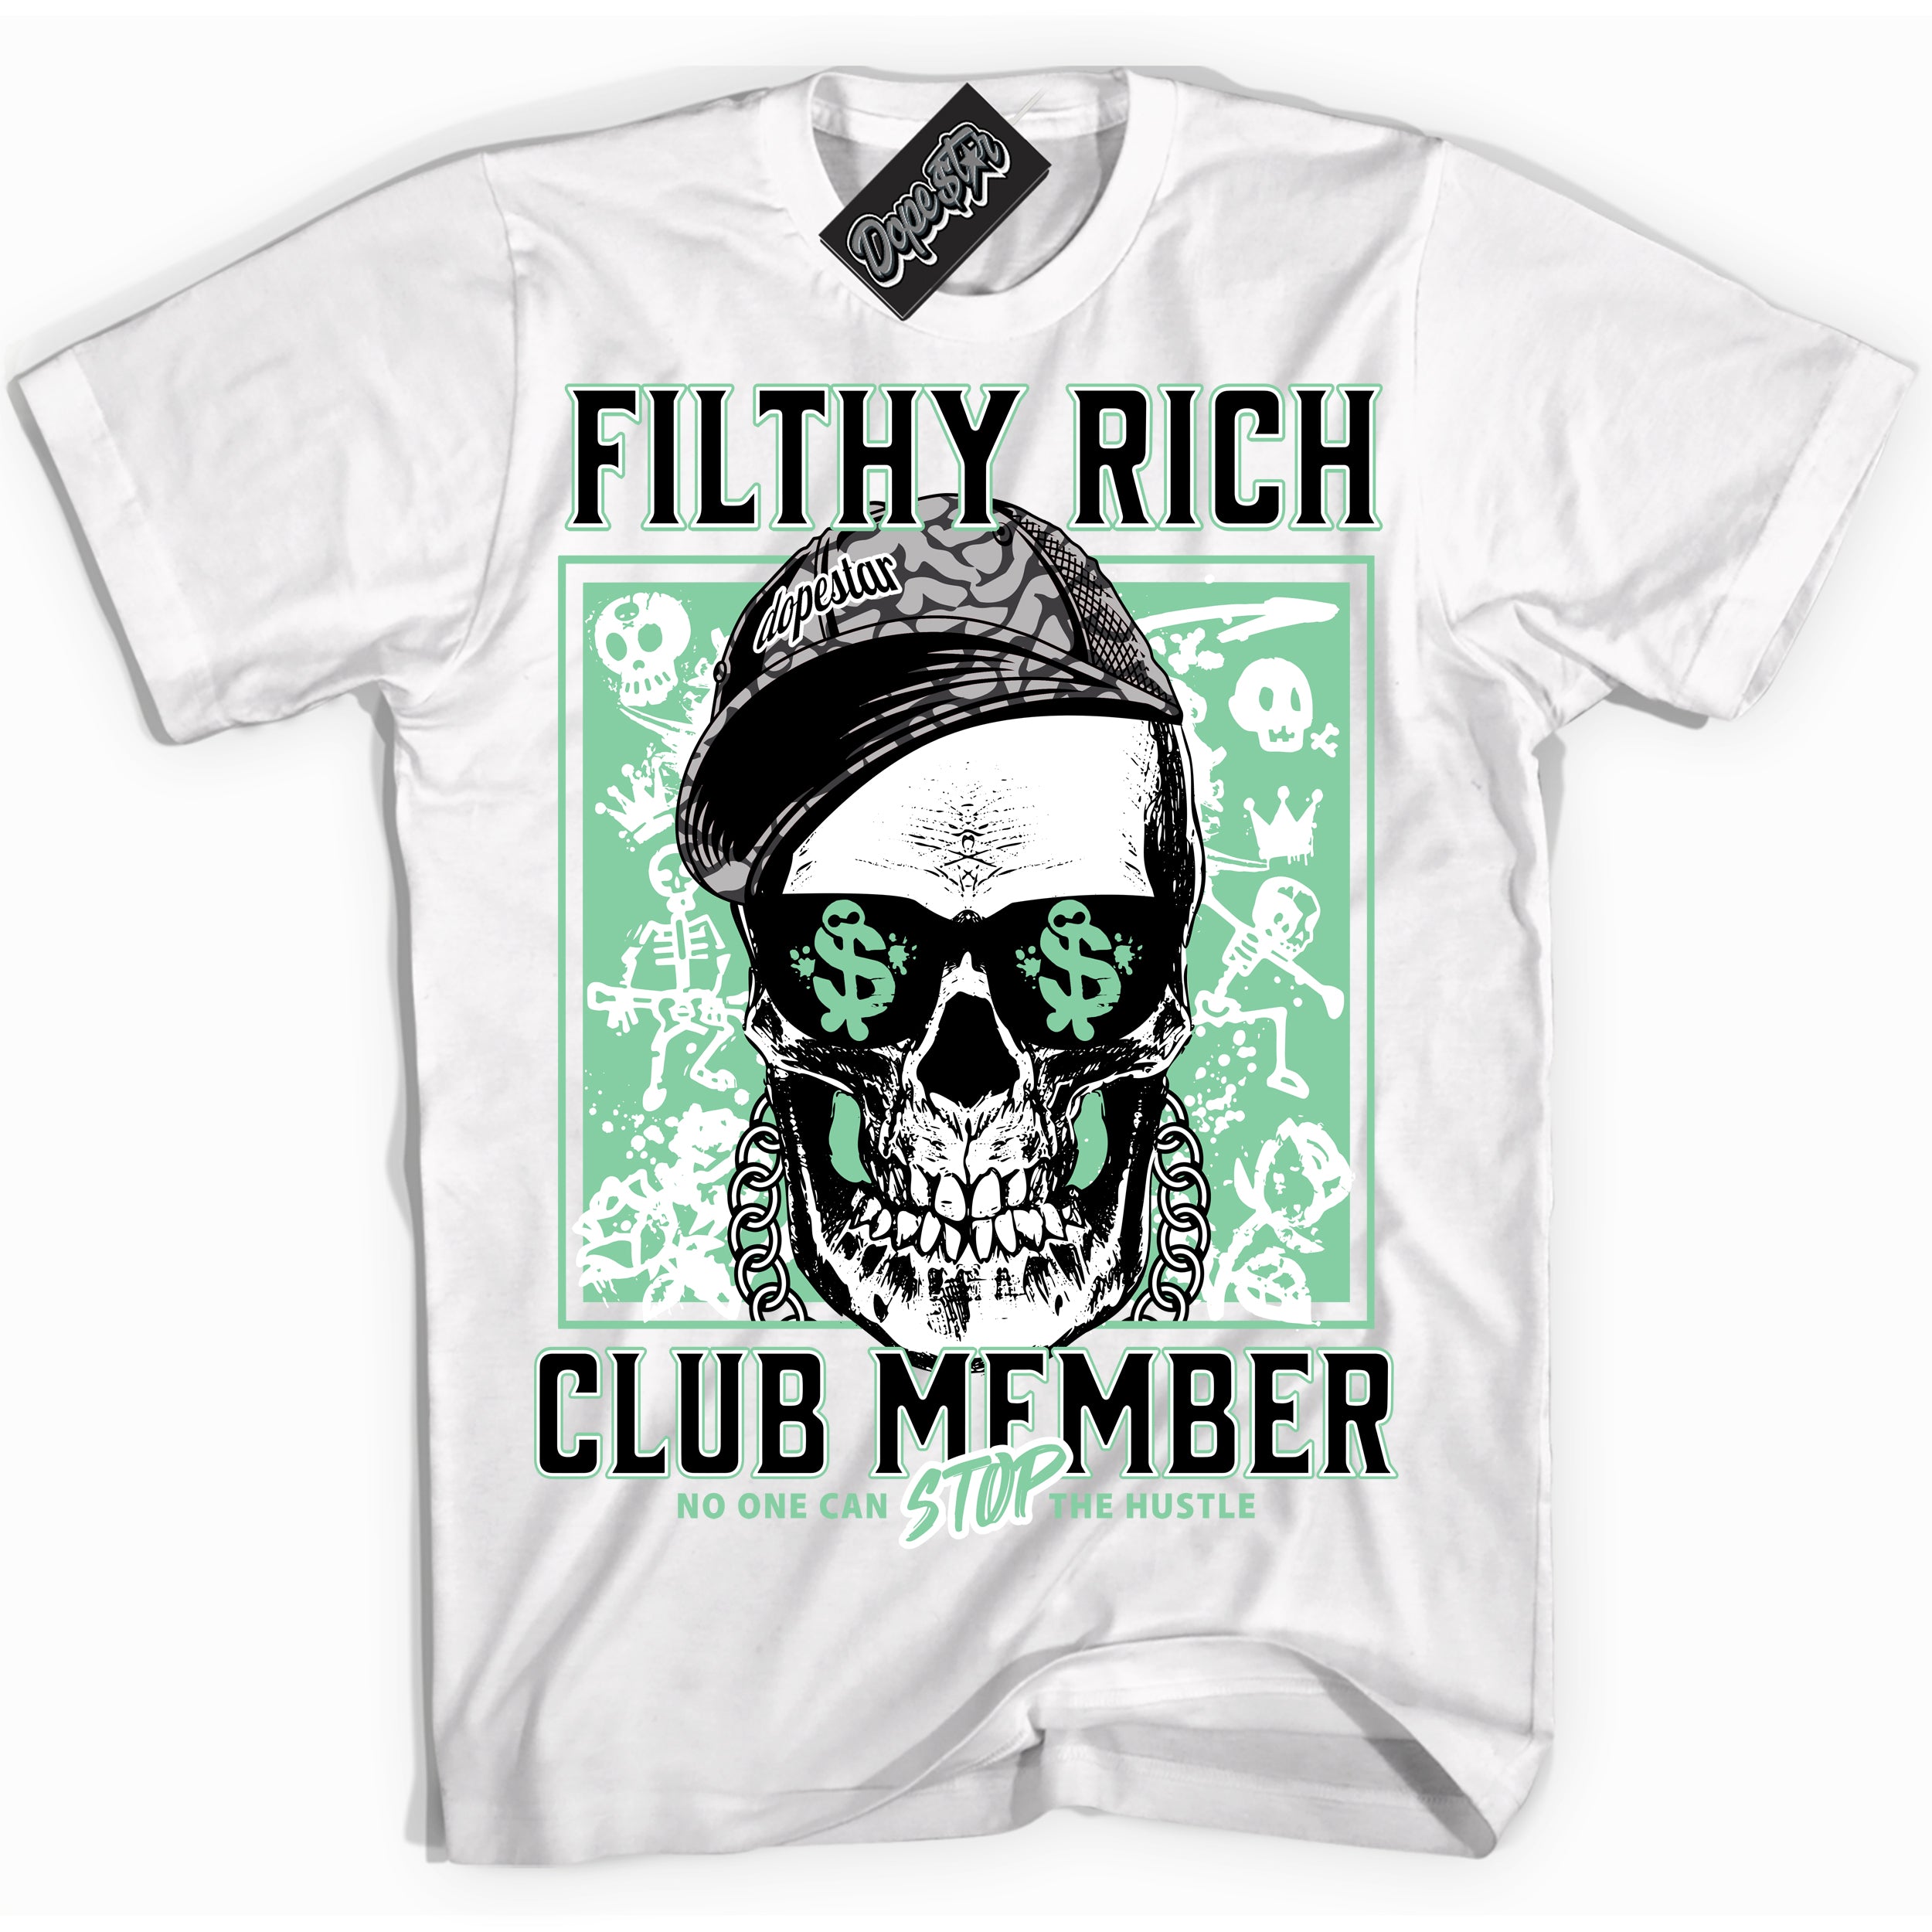 Cool White Shirt with “ Filthy Rich” design that perfectly matches Green Glow 3s Sneakers.